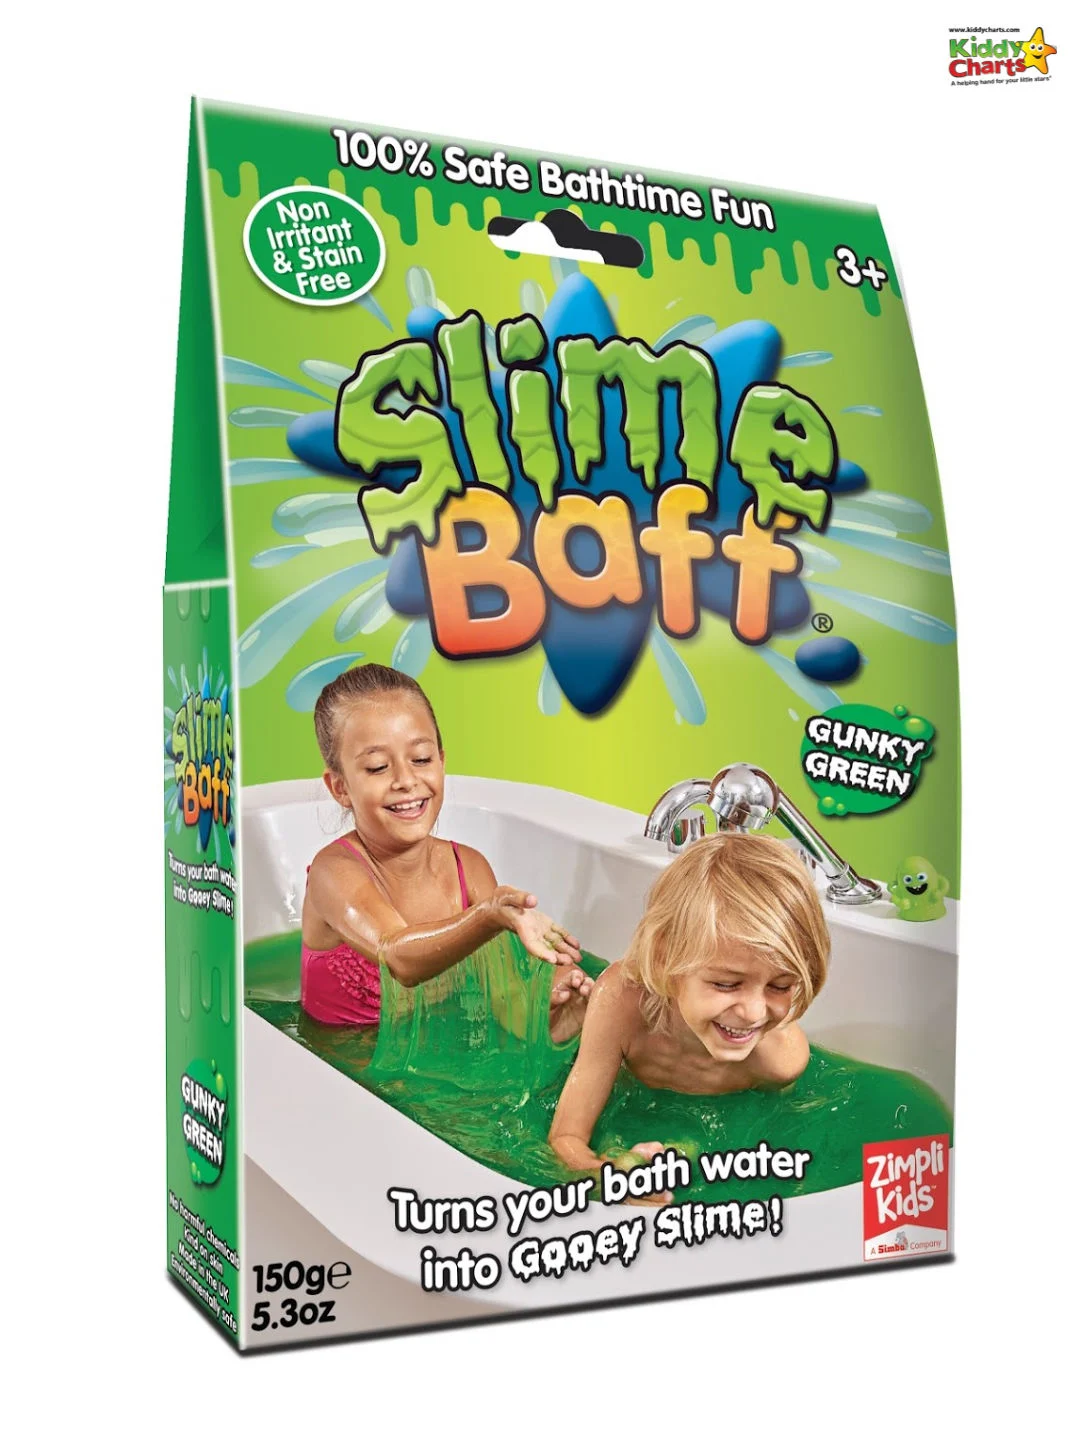 Slime baff - boredom busters gift guide